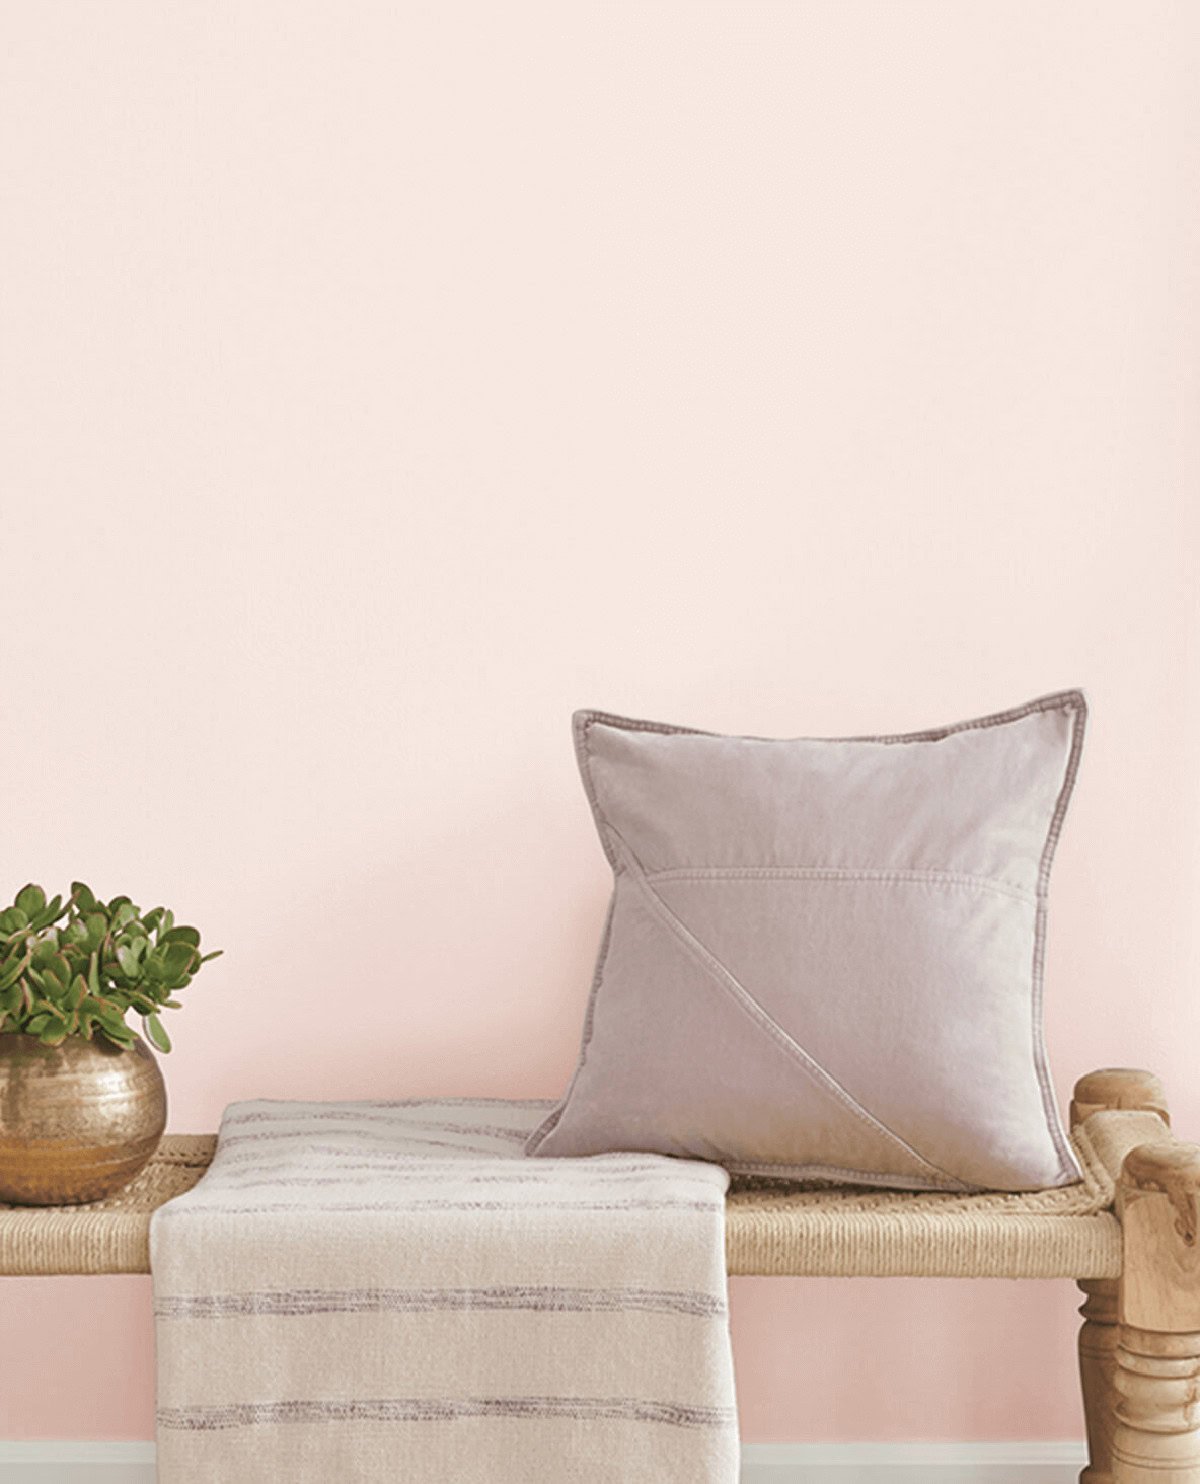 Sherwin Williams Cosmetic Blush paired with a wood bench and blush purple pillow.